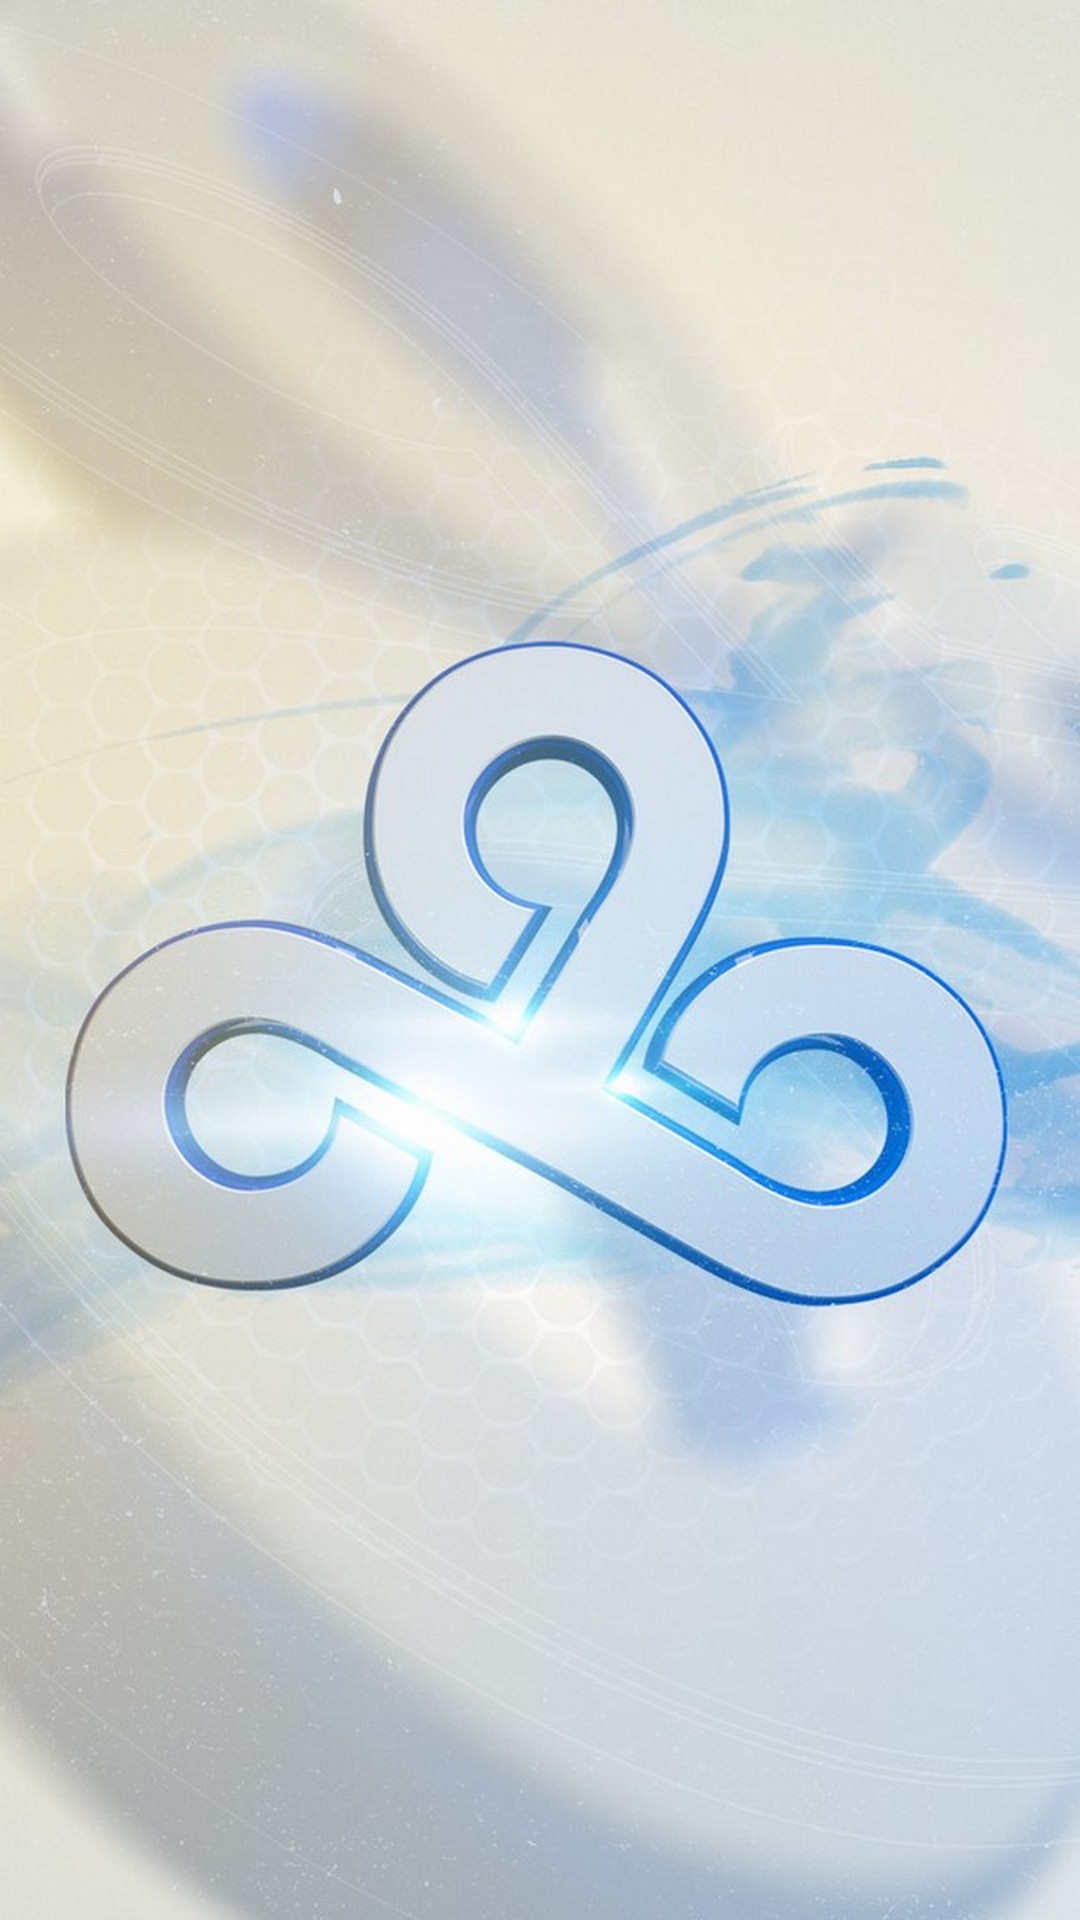 Cloud 9 Wallpaper For iPhone with HD Resolution 1080X1920